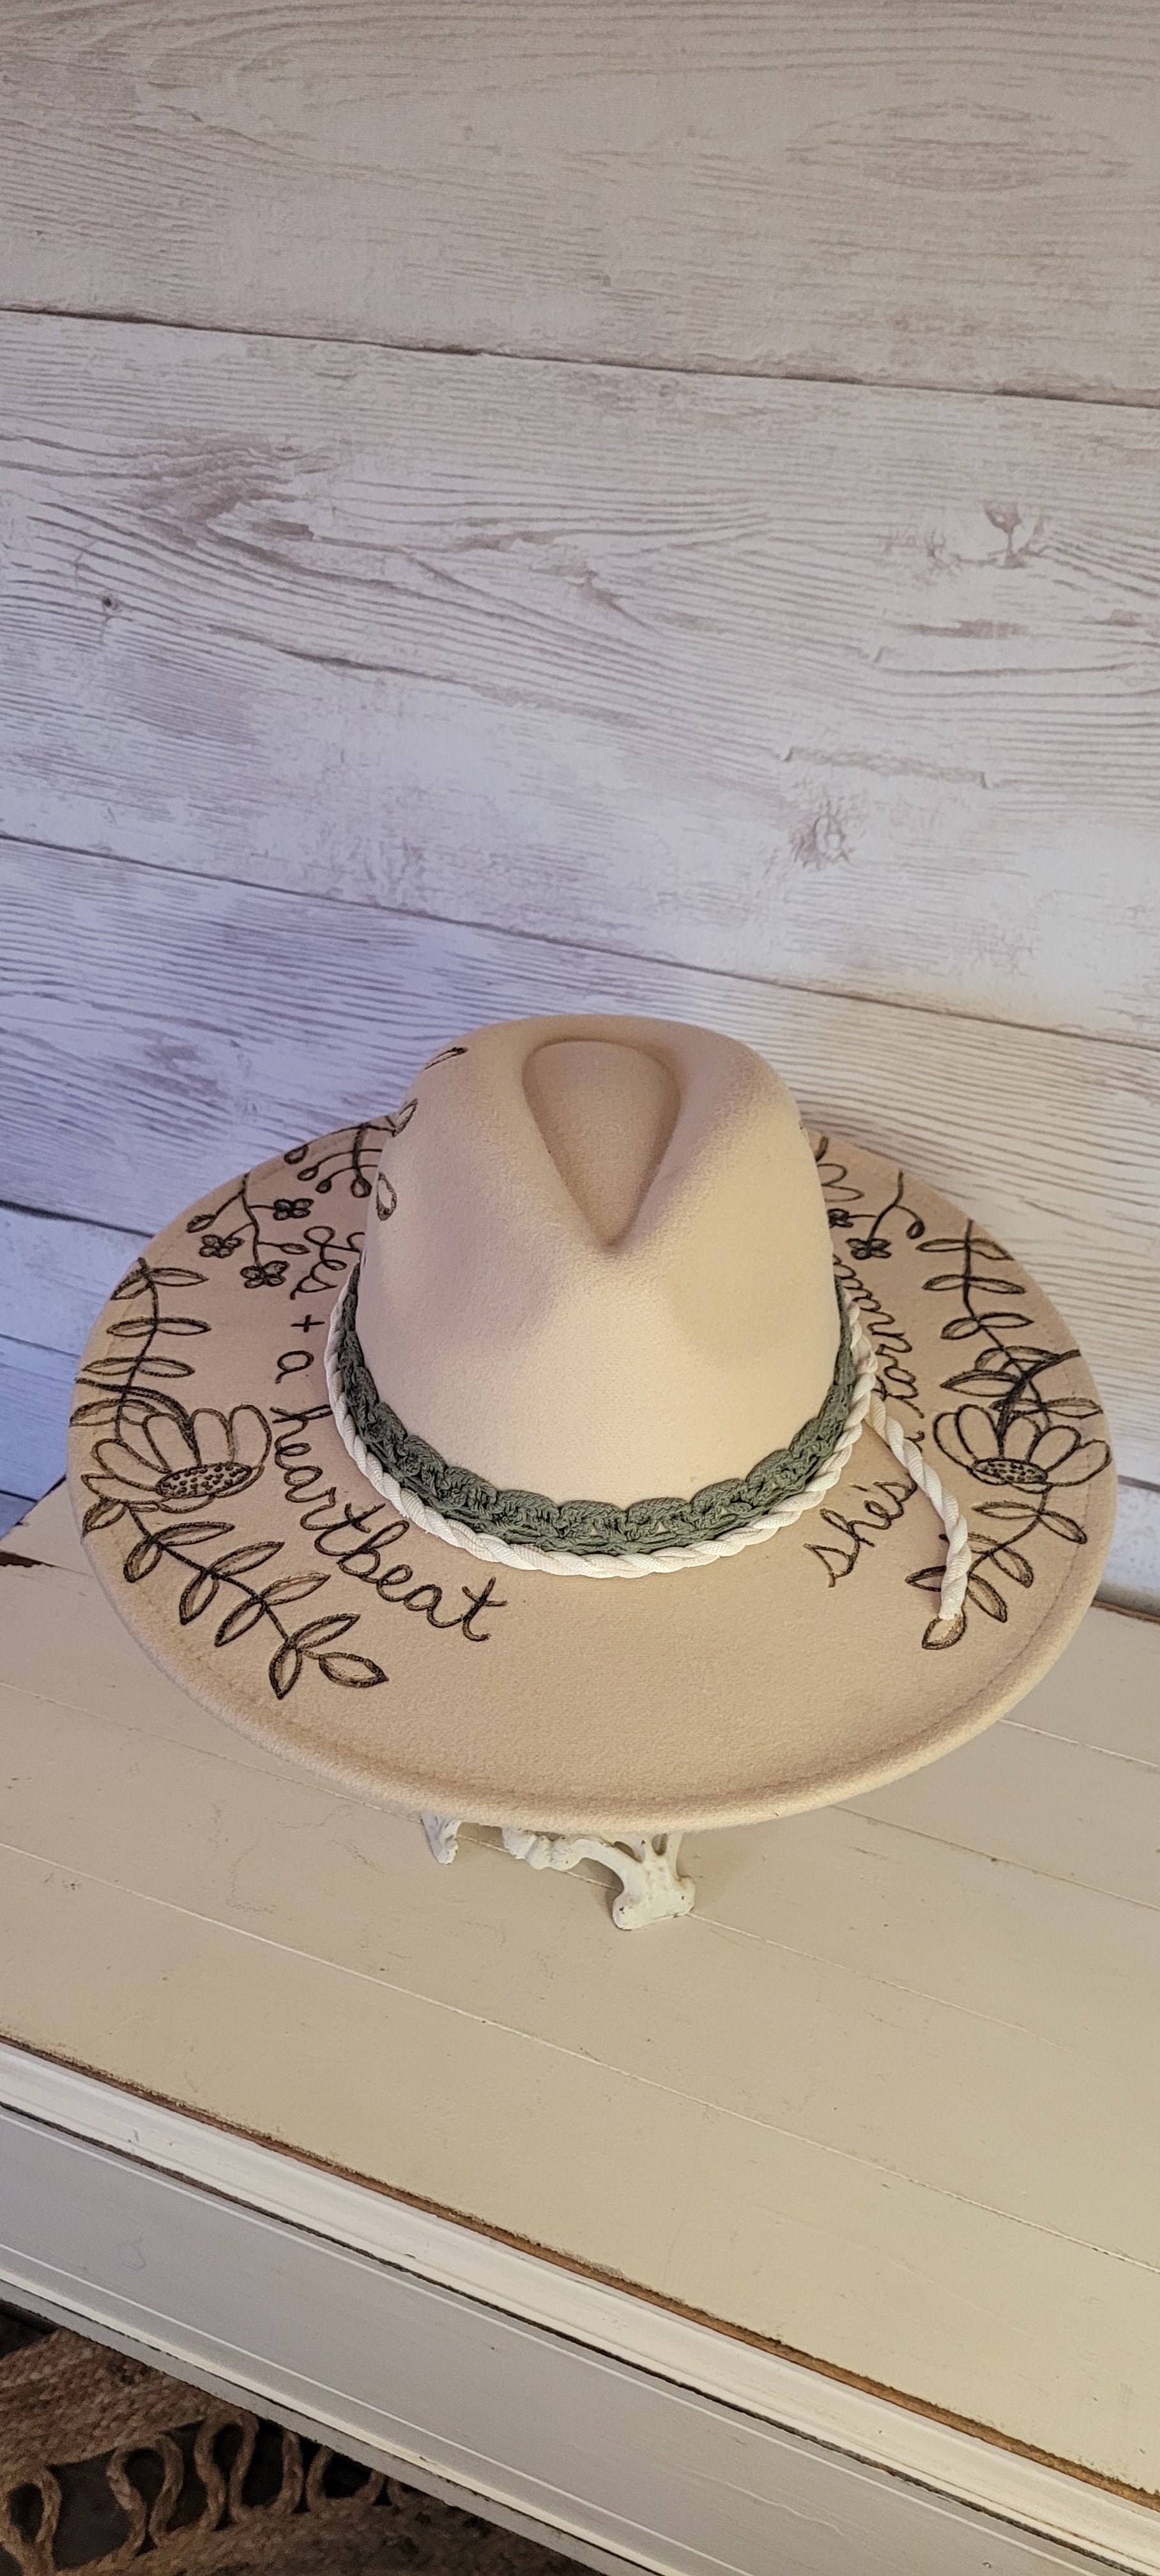 Custom engraved by Kayla Features whimsical flowers Ivory brim hat fedora style Felt hat Flat brim 65% polyester and 35% cotton Ribbon drawstring for hat size adjustment Head Circumference: 25" H:5.25" L:16" W:14.5"